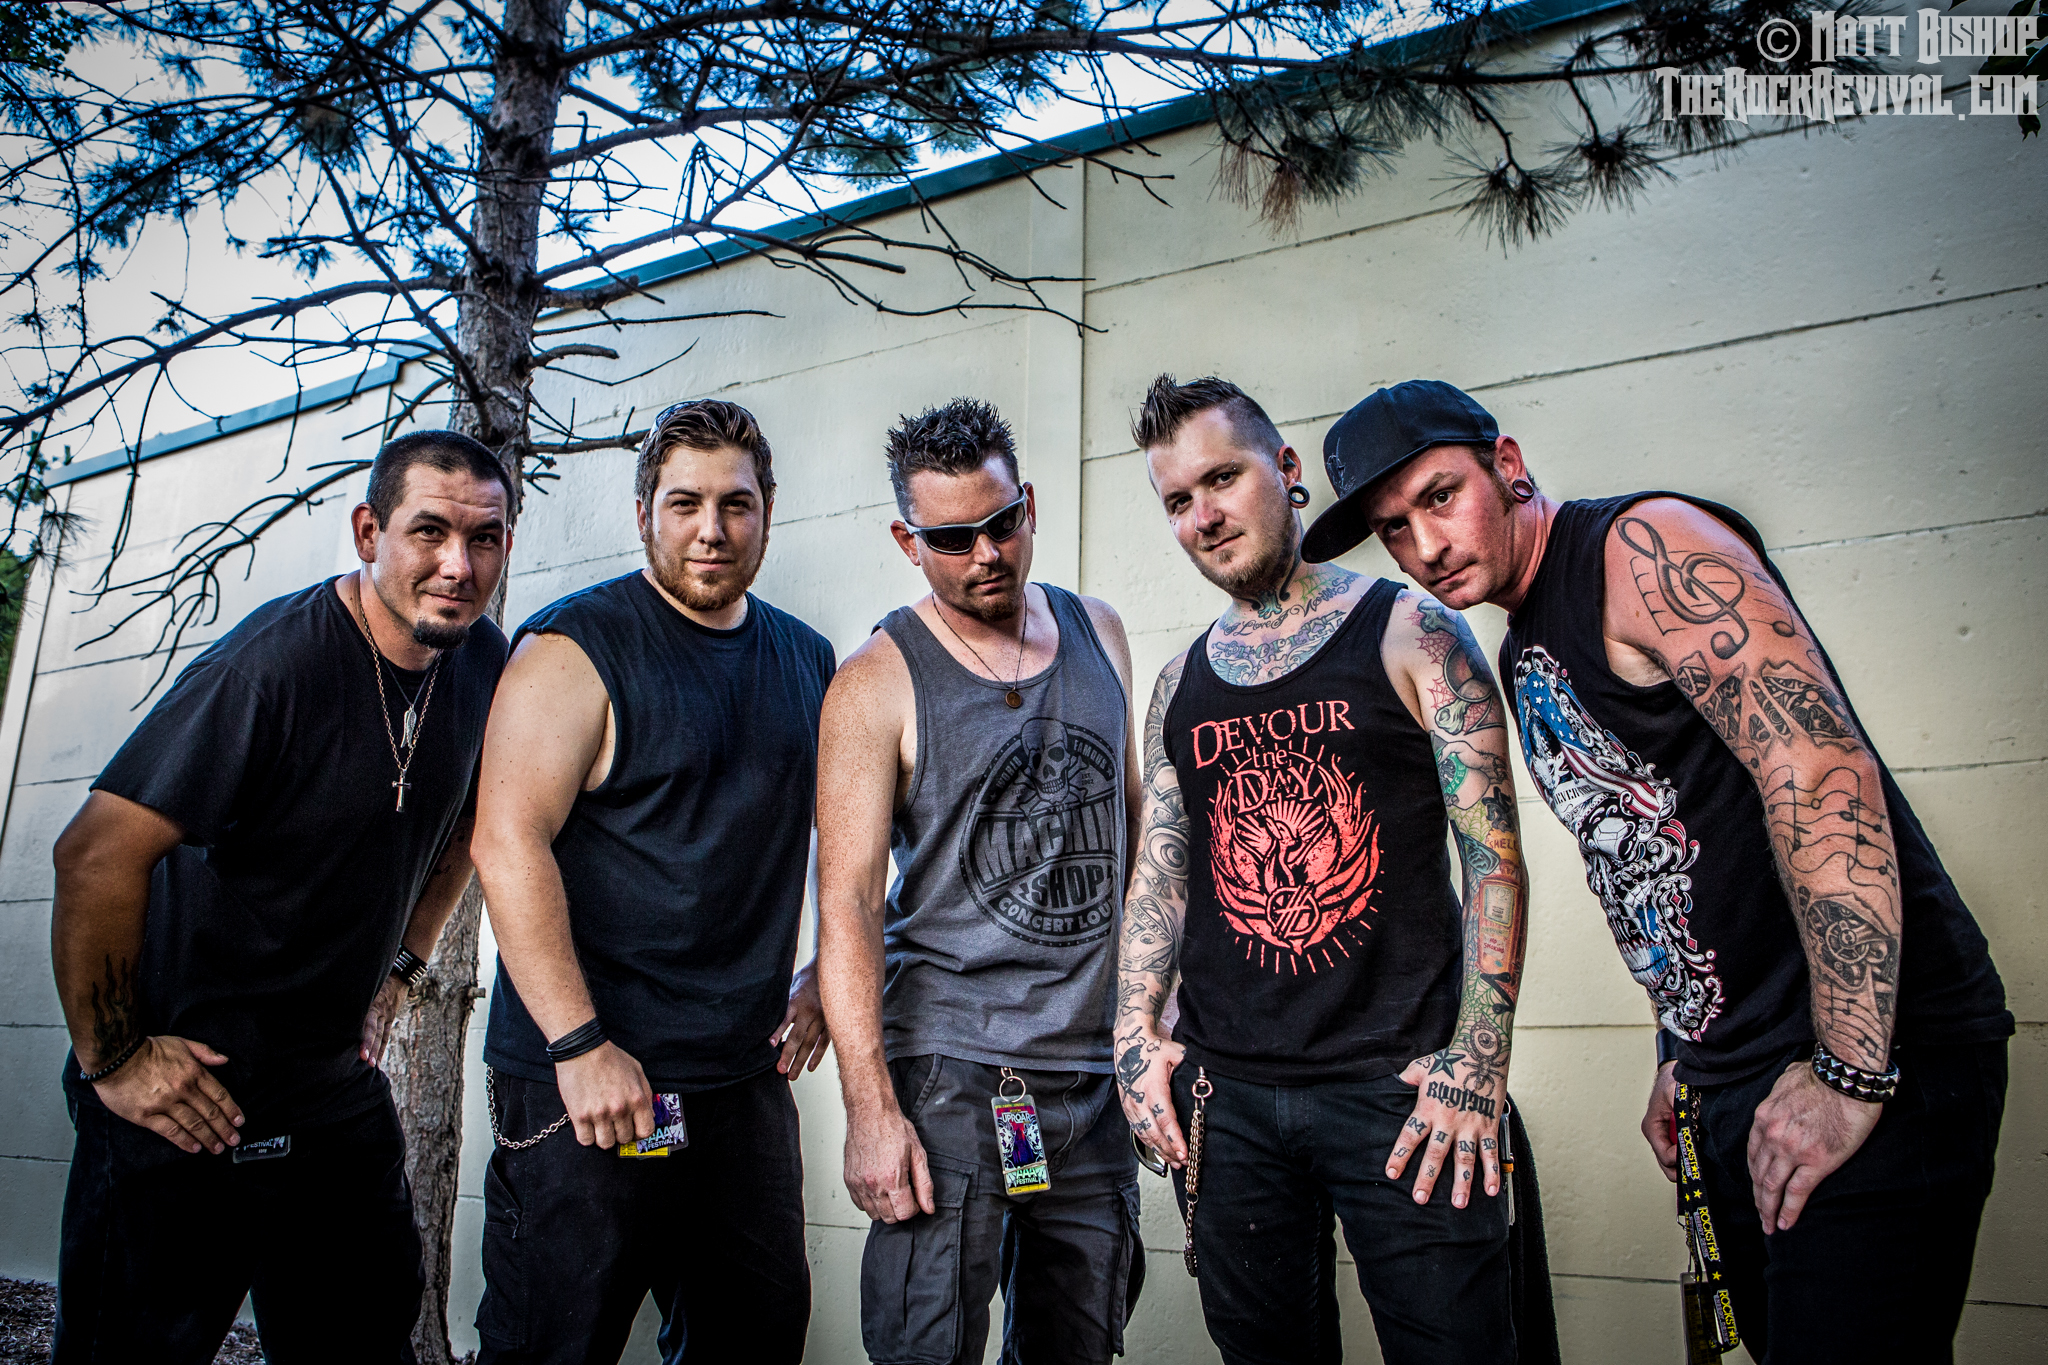 CHEMICAL RIDE – A CONVERSATION WITH 3 YEARS HOLLOW AT UPROAR FESTIVAL 2014